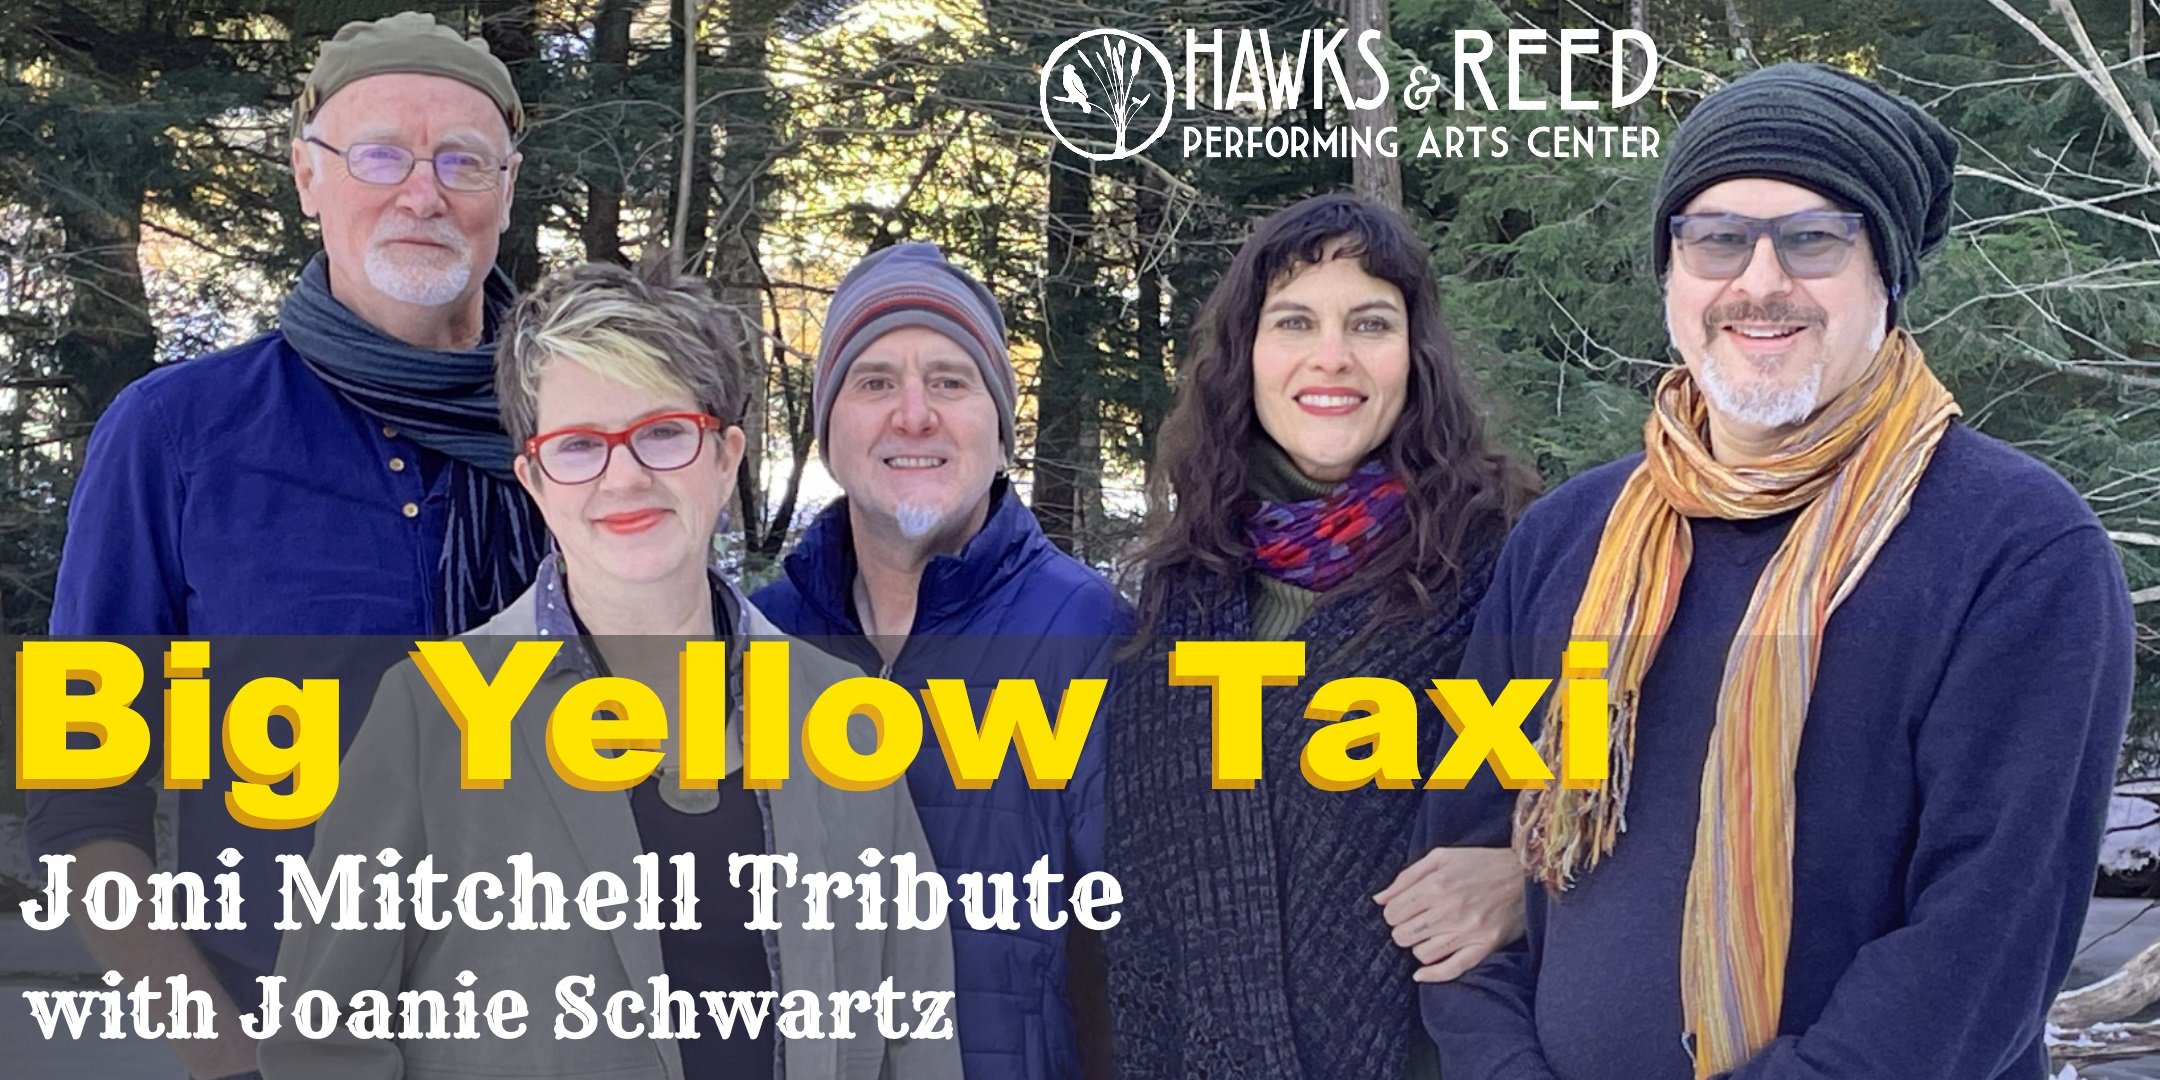 Big Yellow Taxi Band – Joni Mitchell Tribute with special guest Joanie Schwartz